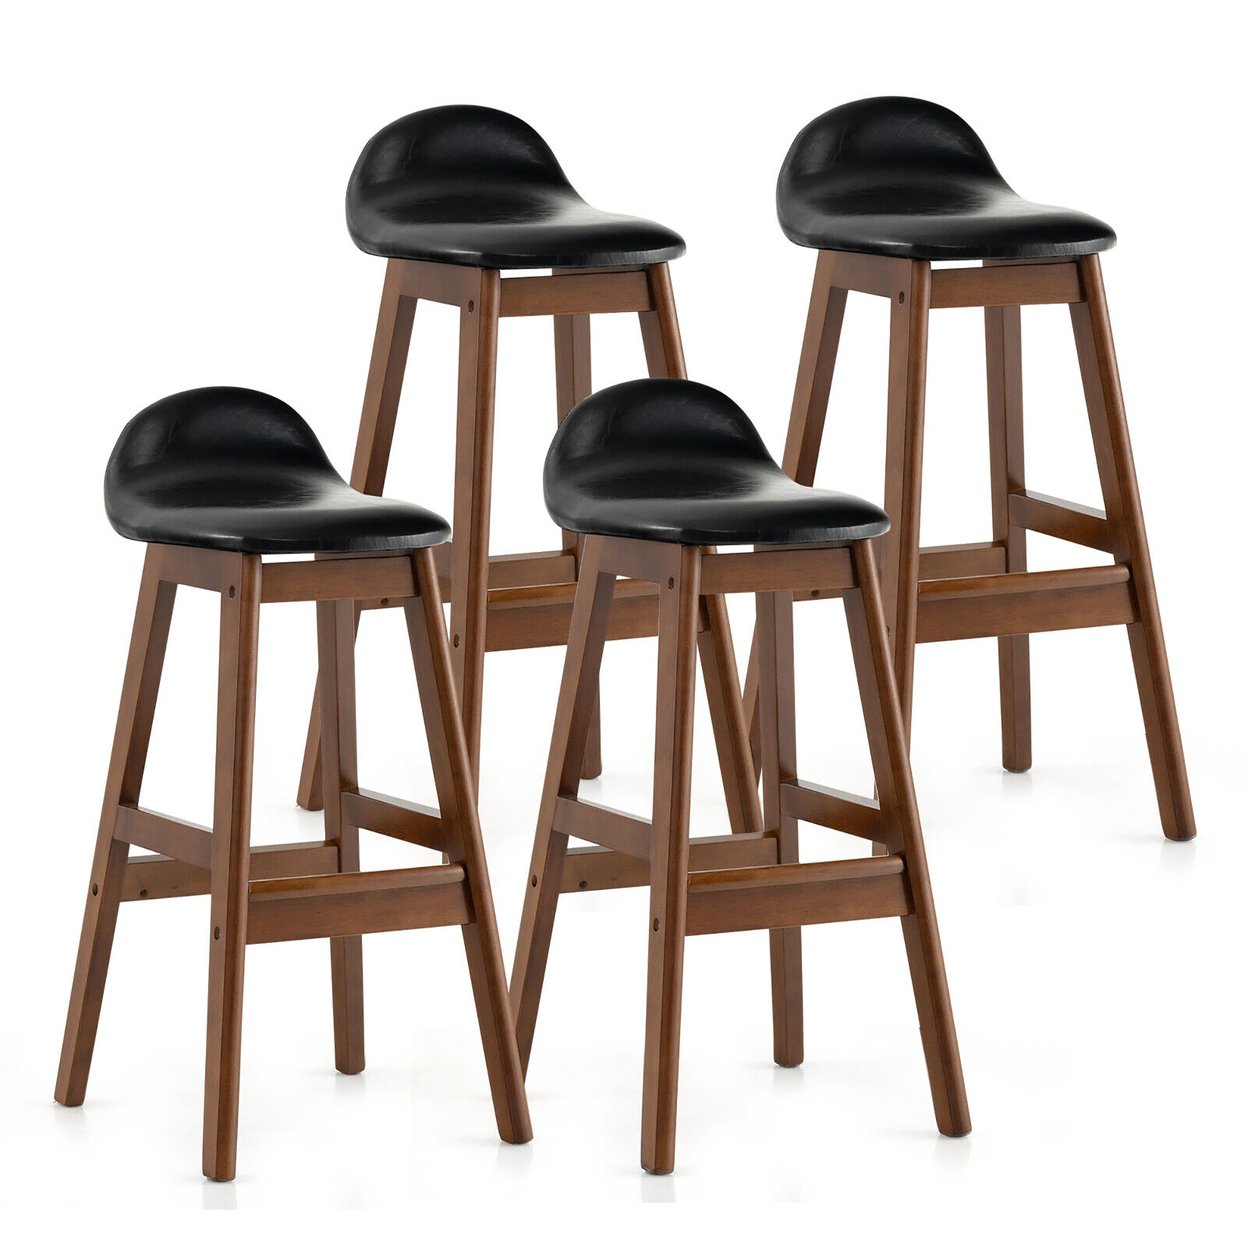 Set Of 4 Upholstered PU Leather Barstools 27.5'' Wooden Dining Chairs Black & Brown